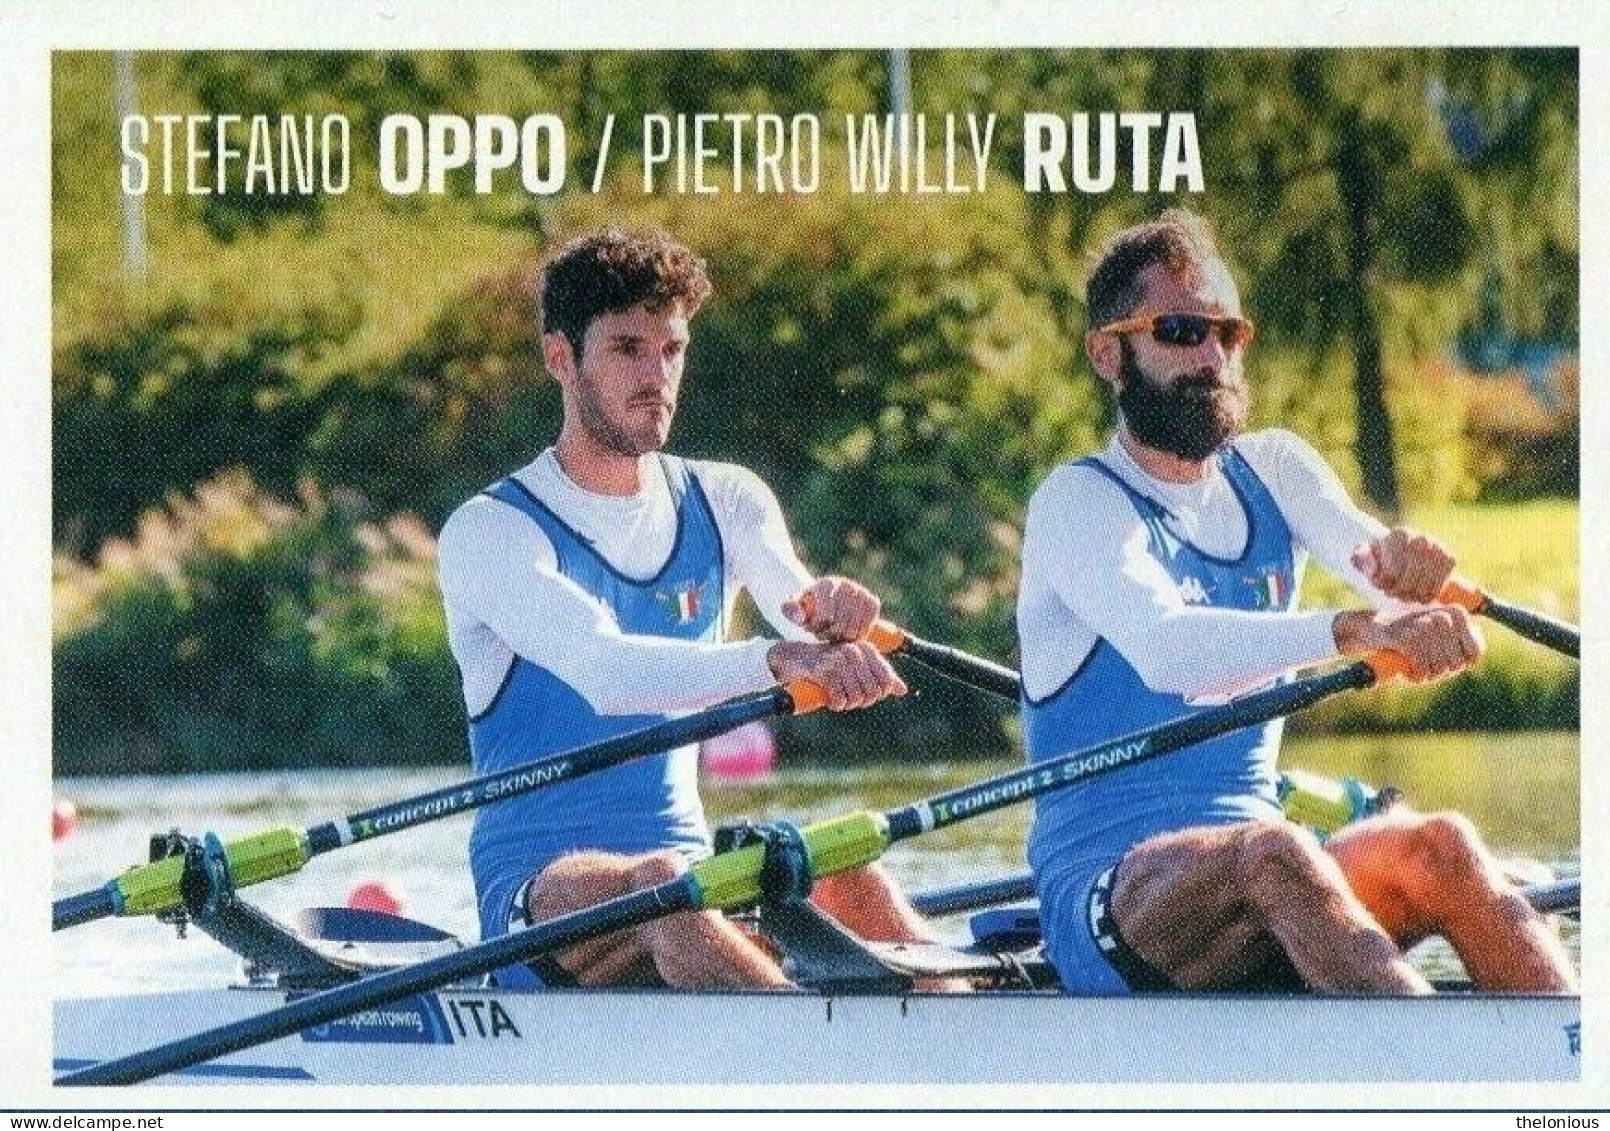 # STEFANO OPPO / PIETRO WILLY RUTA - N. 42 - ESSELUNGA SUPER CHAMPS, TOKYO 2020 - Rowing